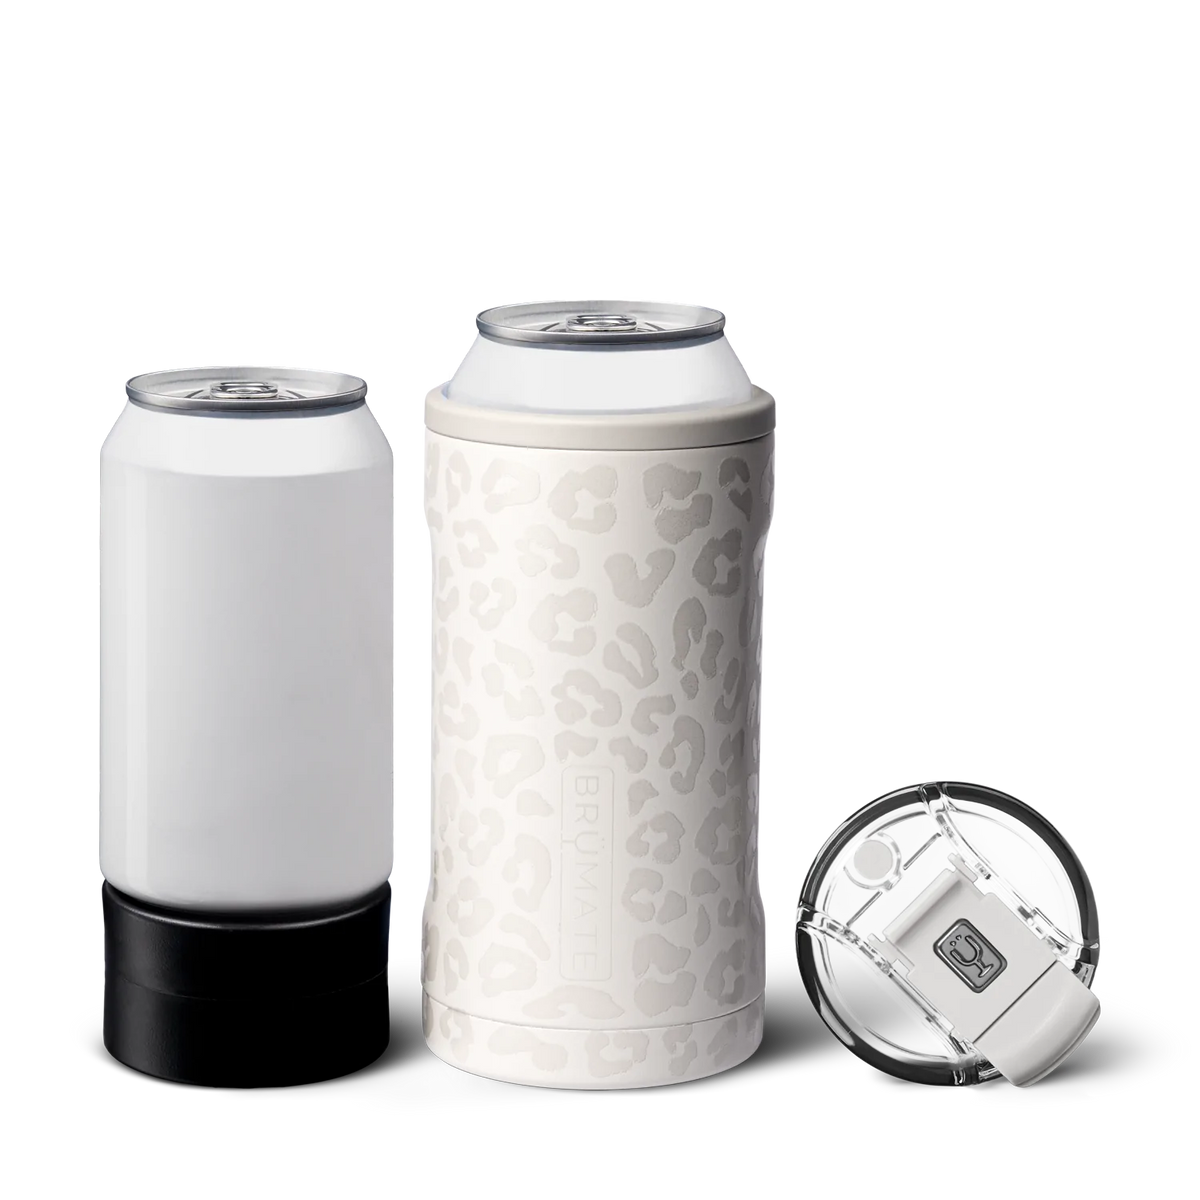 BrMate Hopsulator DUO 2-in-1 Can Cooler Insulated for 12oz Cans